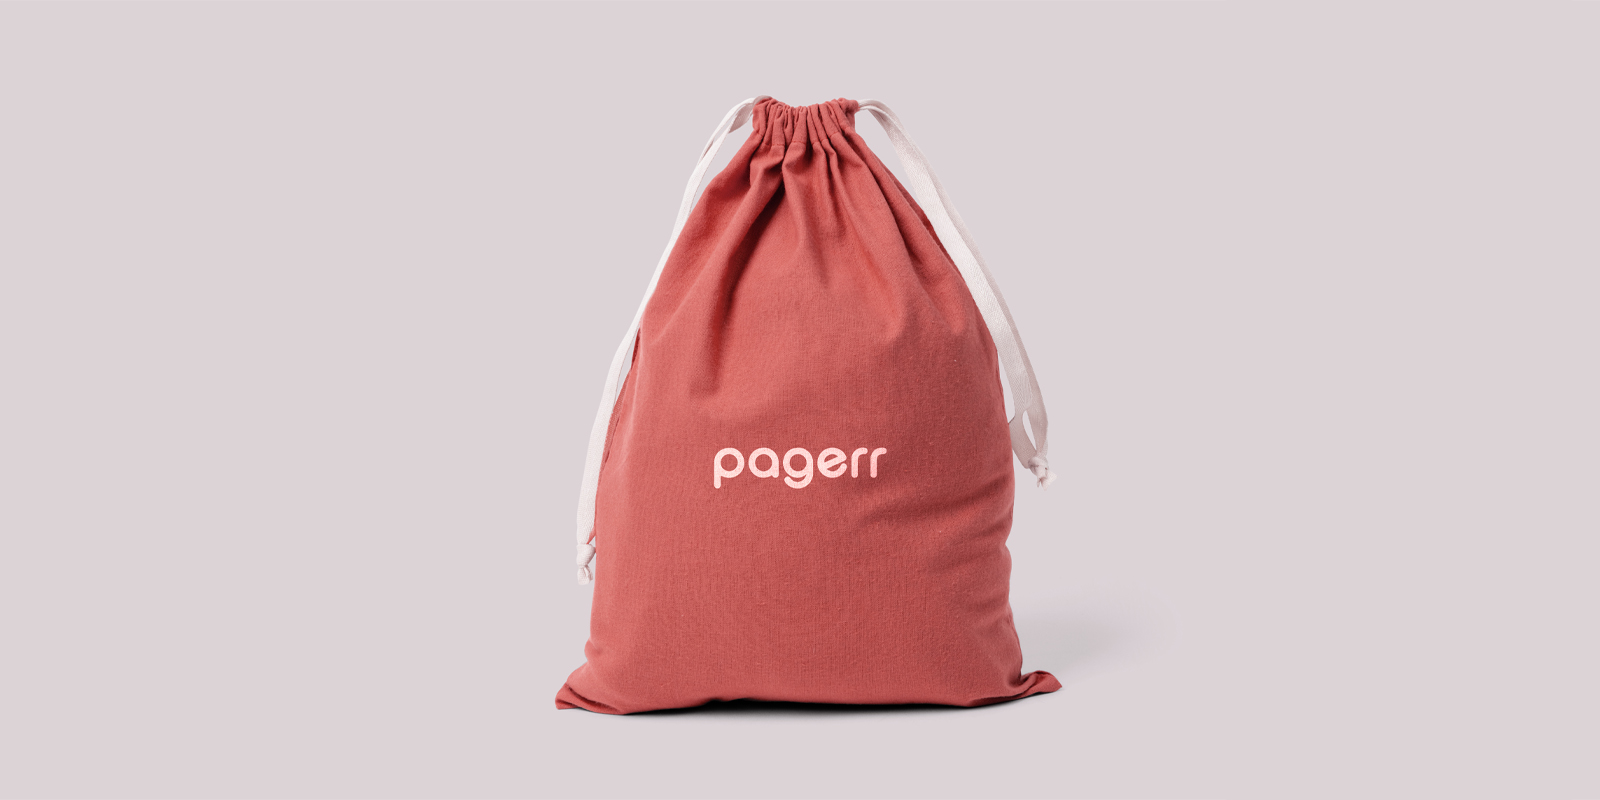 Fabric bags in Paris - Print with Pagerr